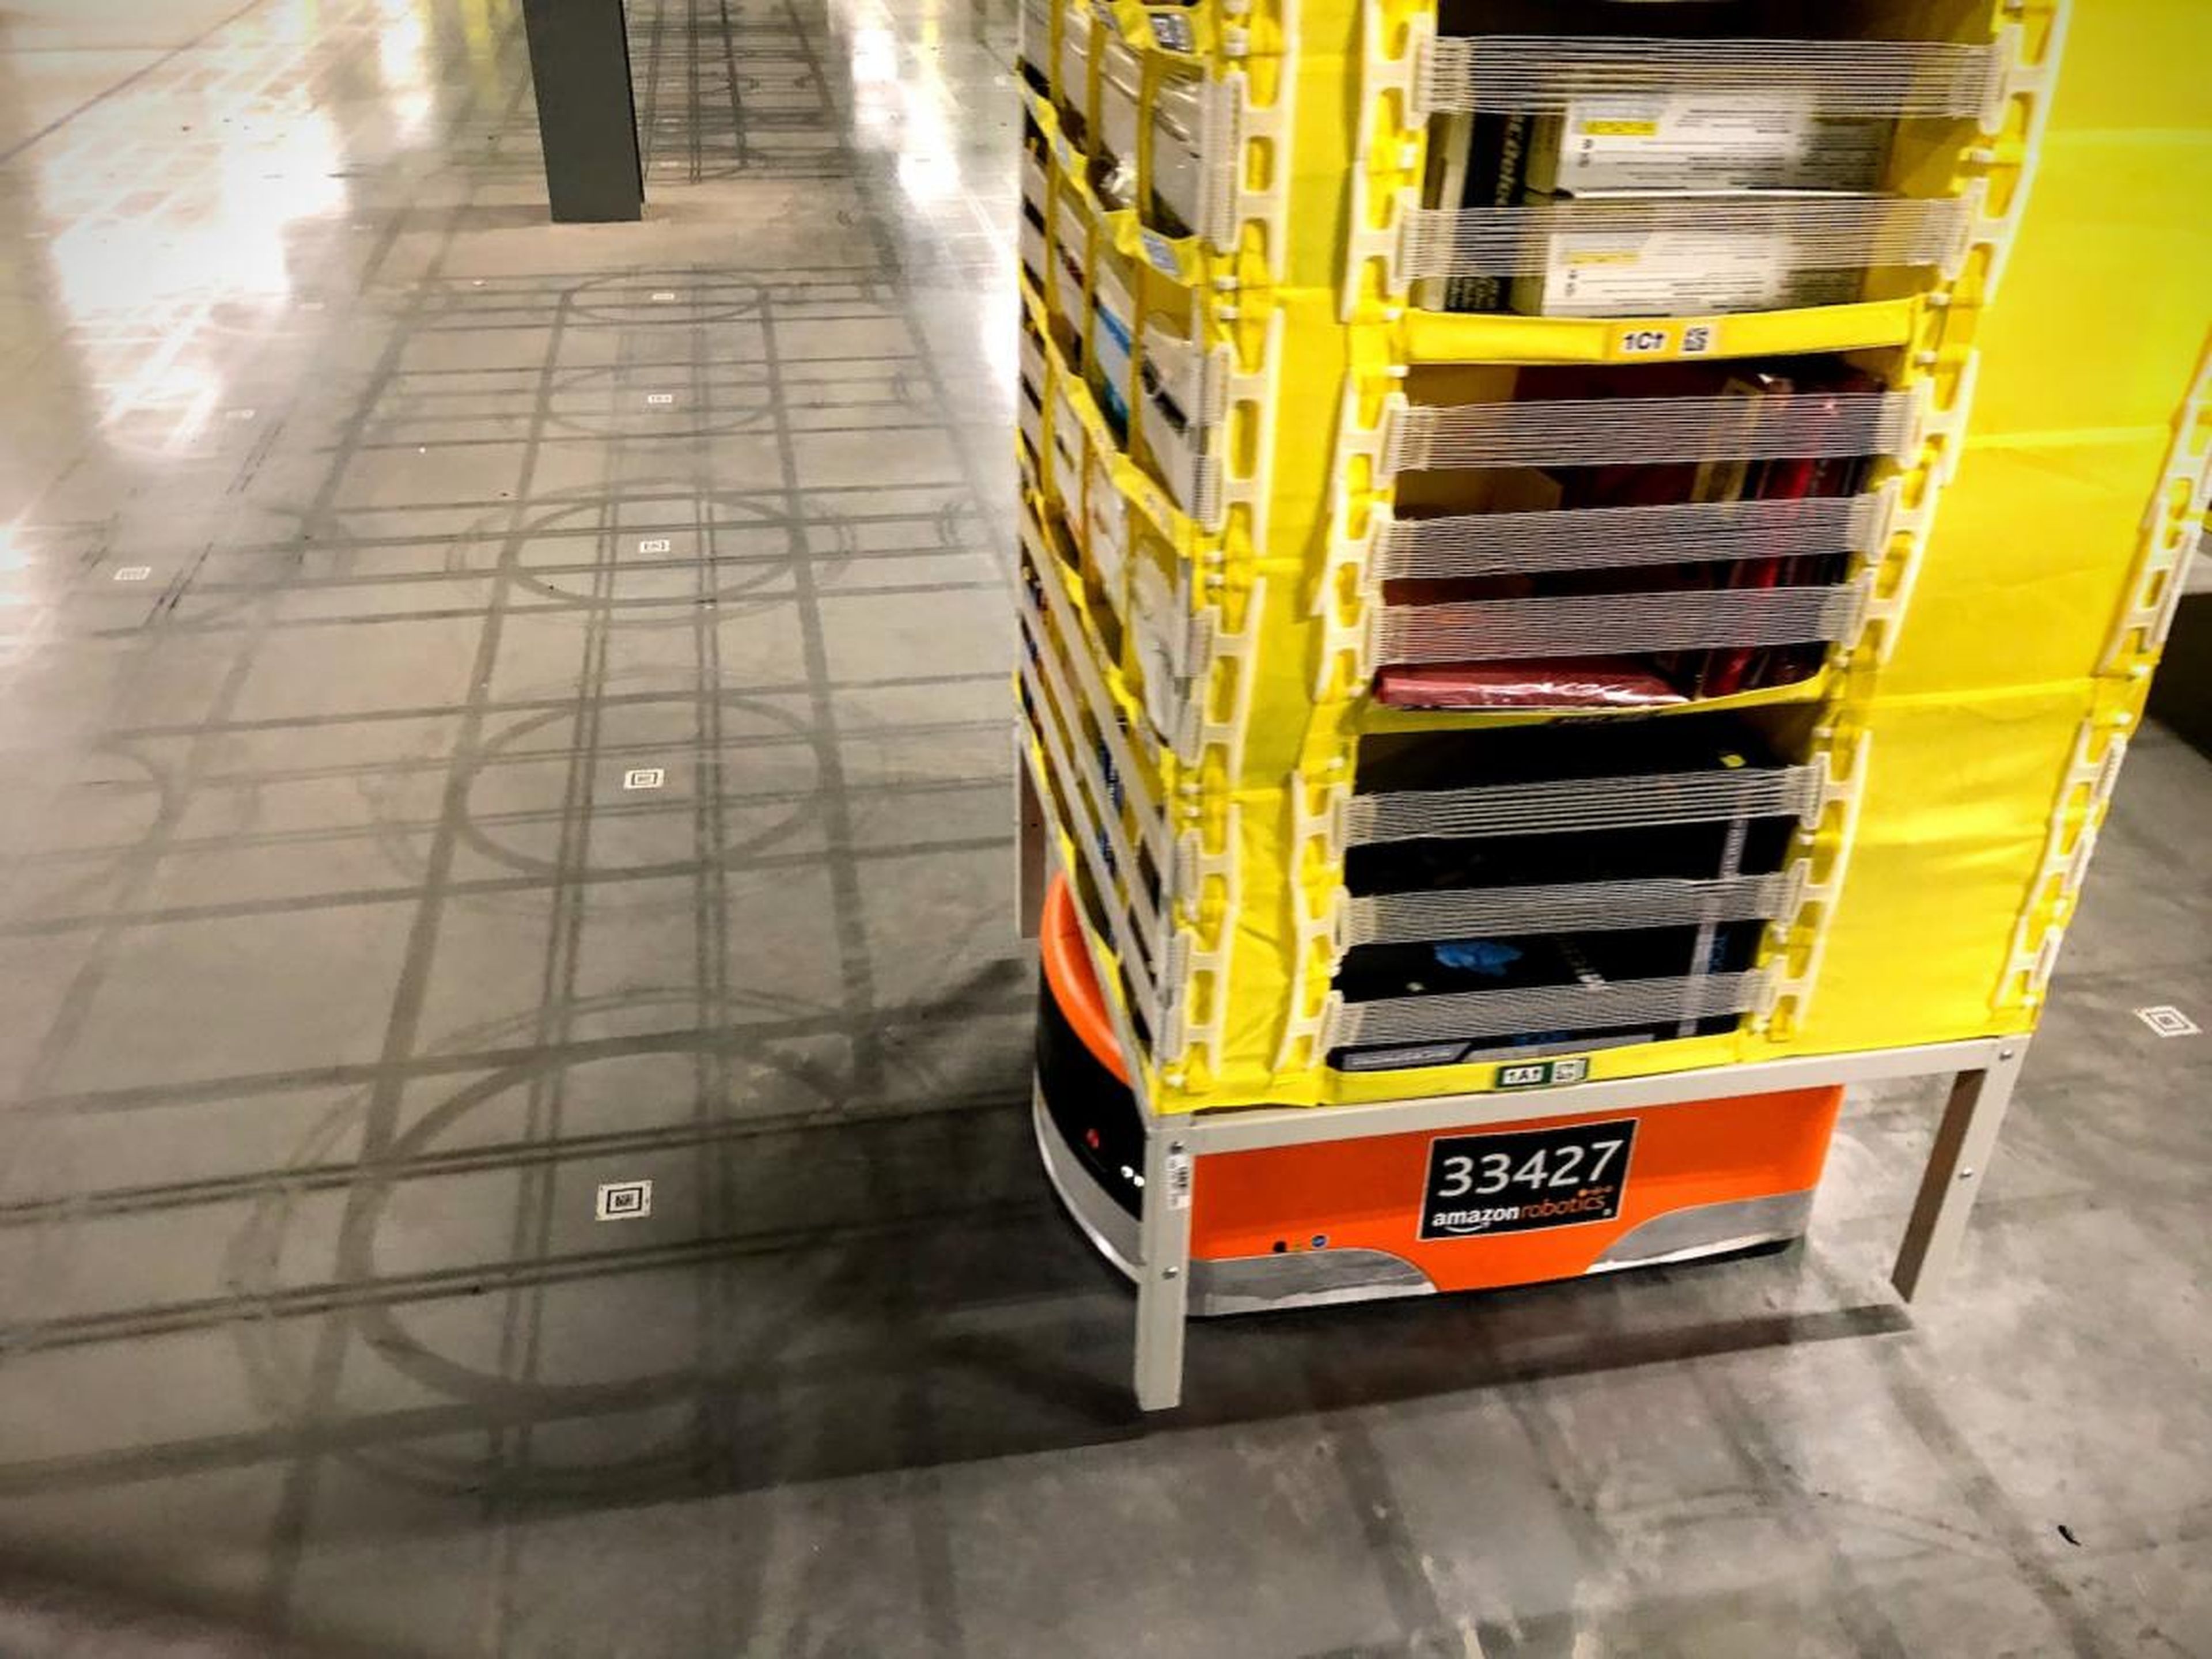 The robots rely on QR codes on the floor to map the room.